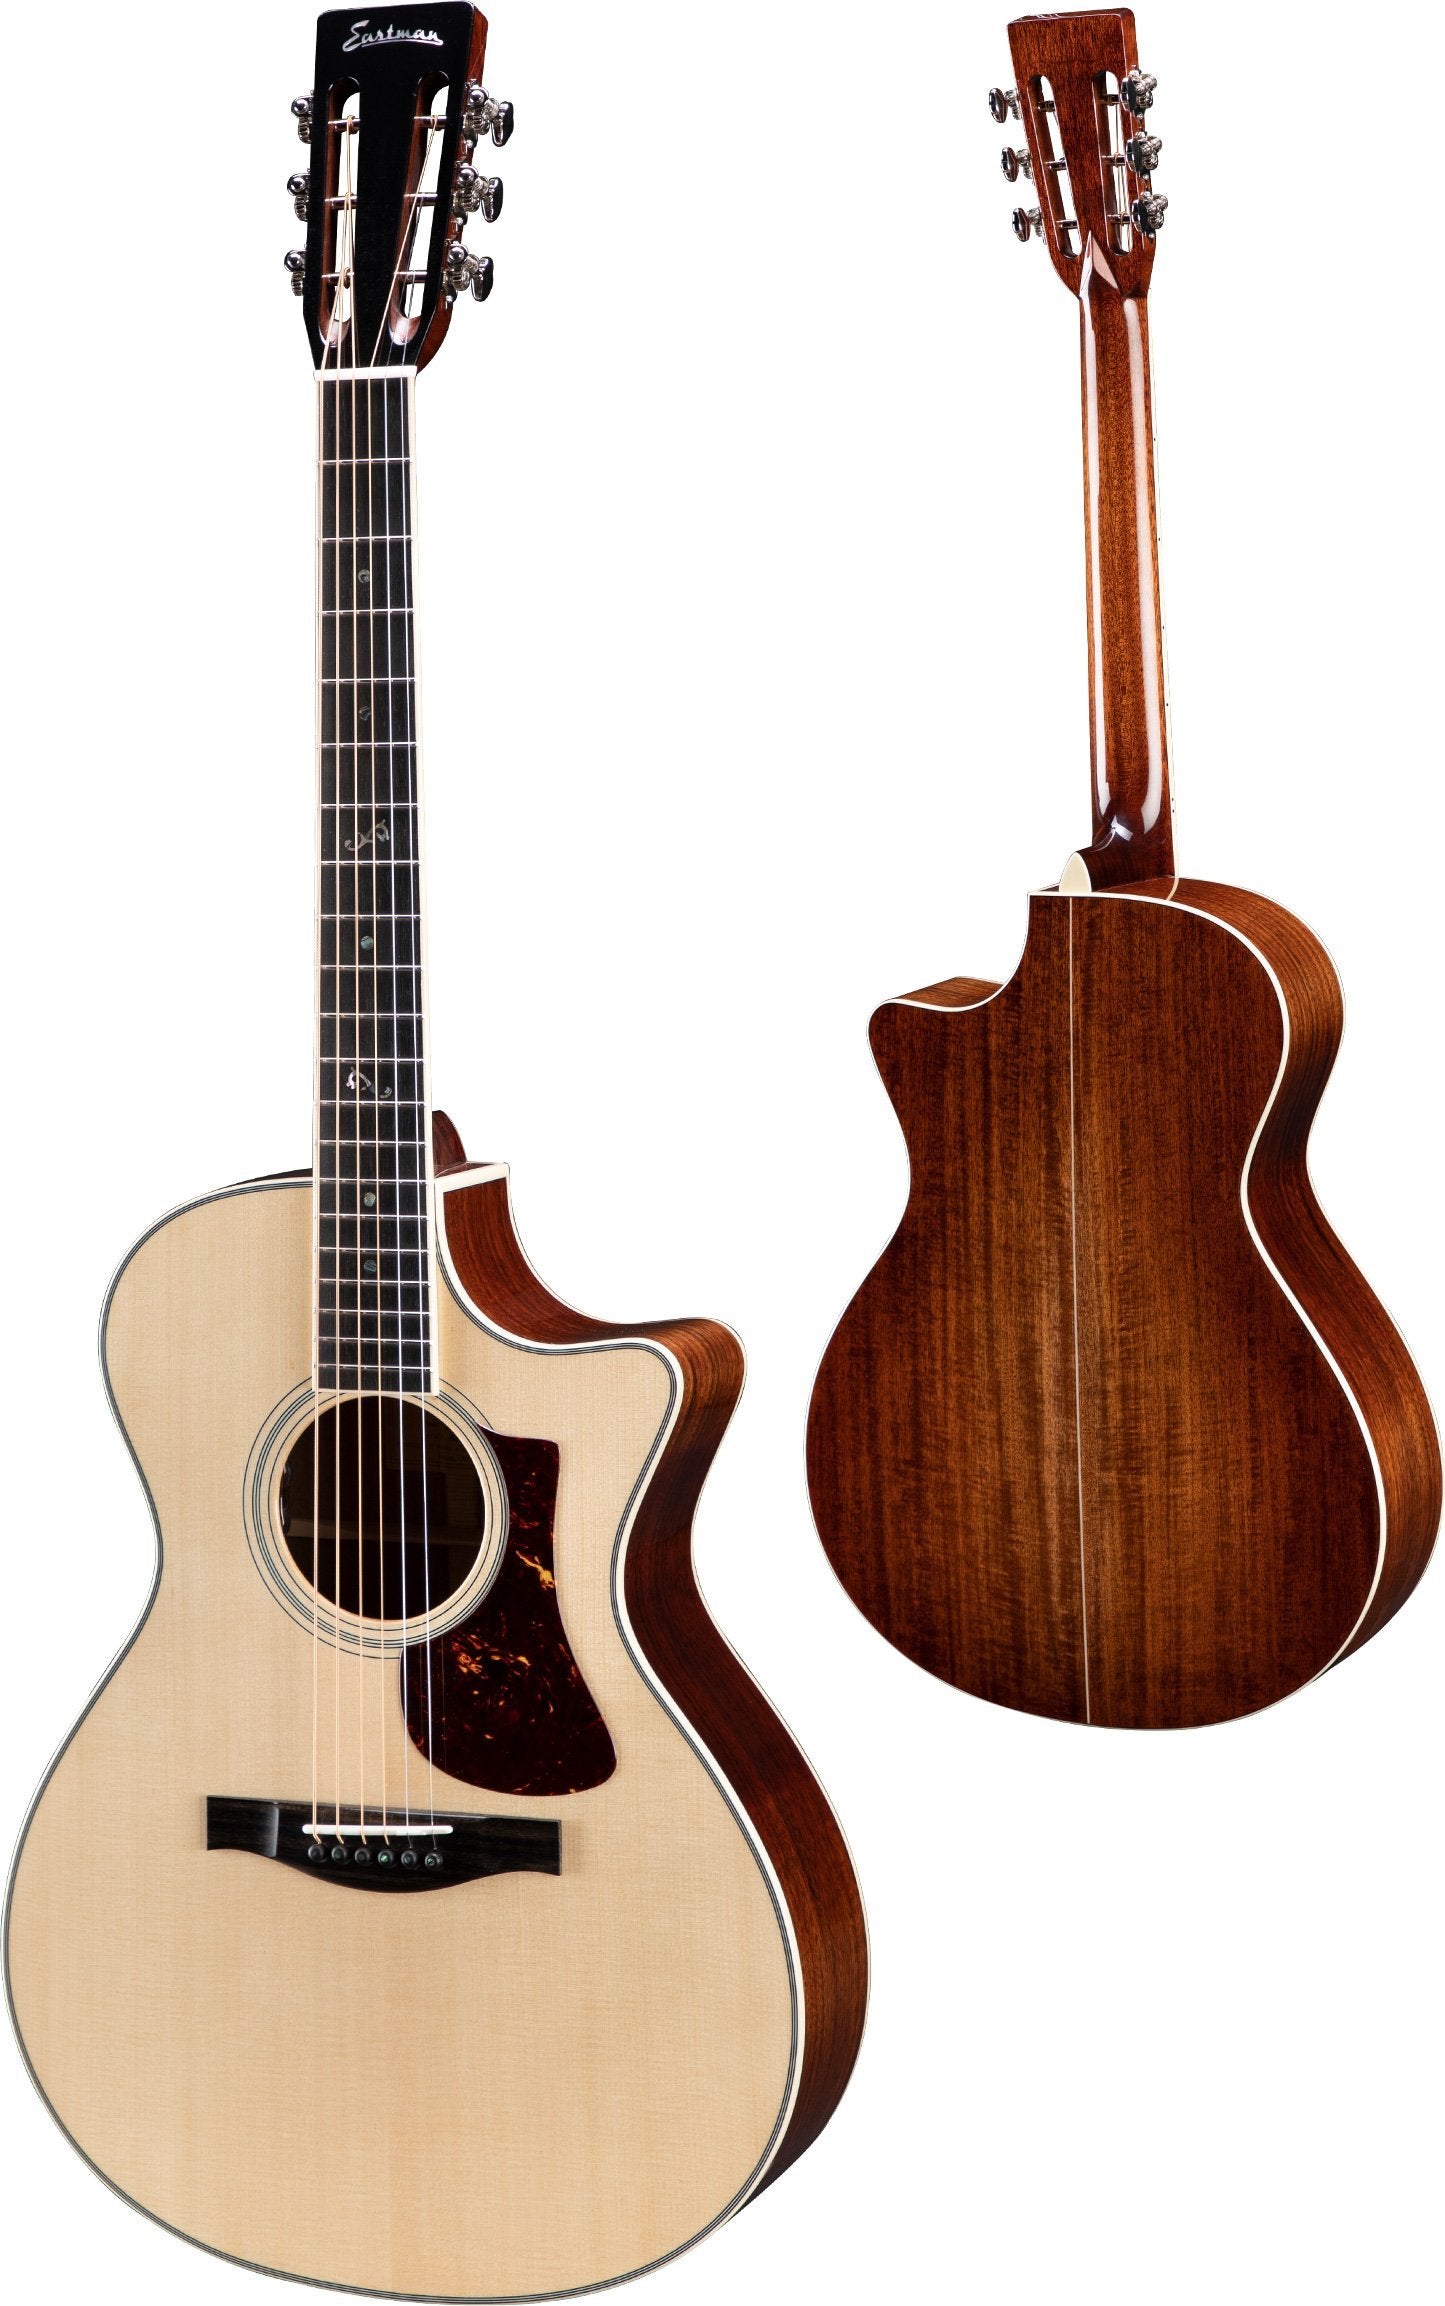 Eastman AC308CE Limited Edition Natural, Electro Acoustic Guitar for sale at Richards Guitars.